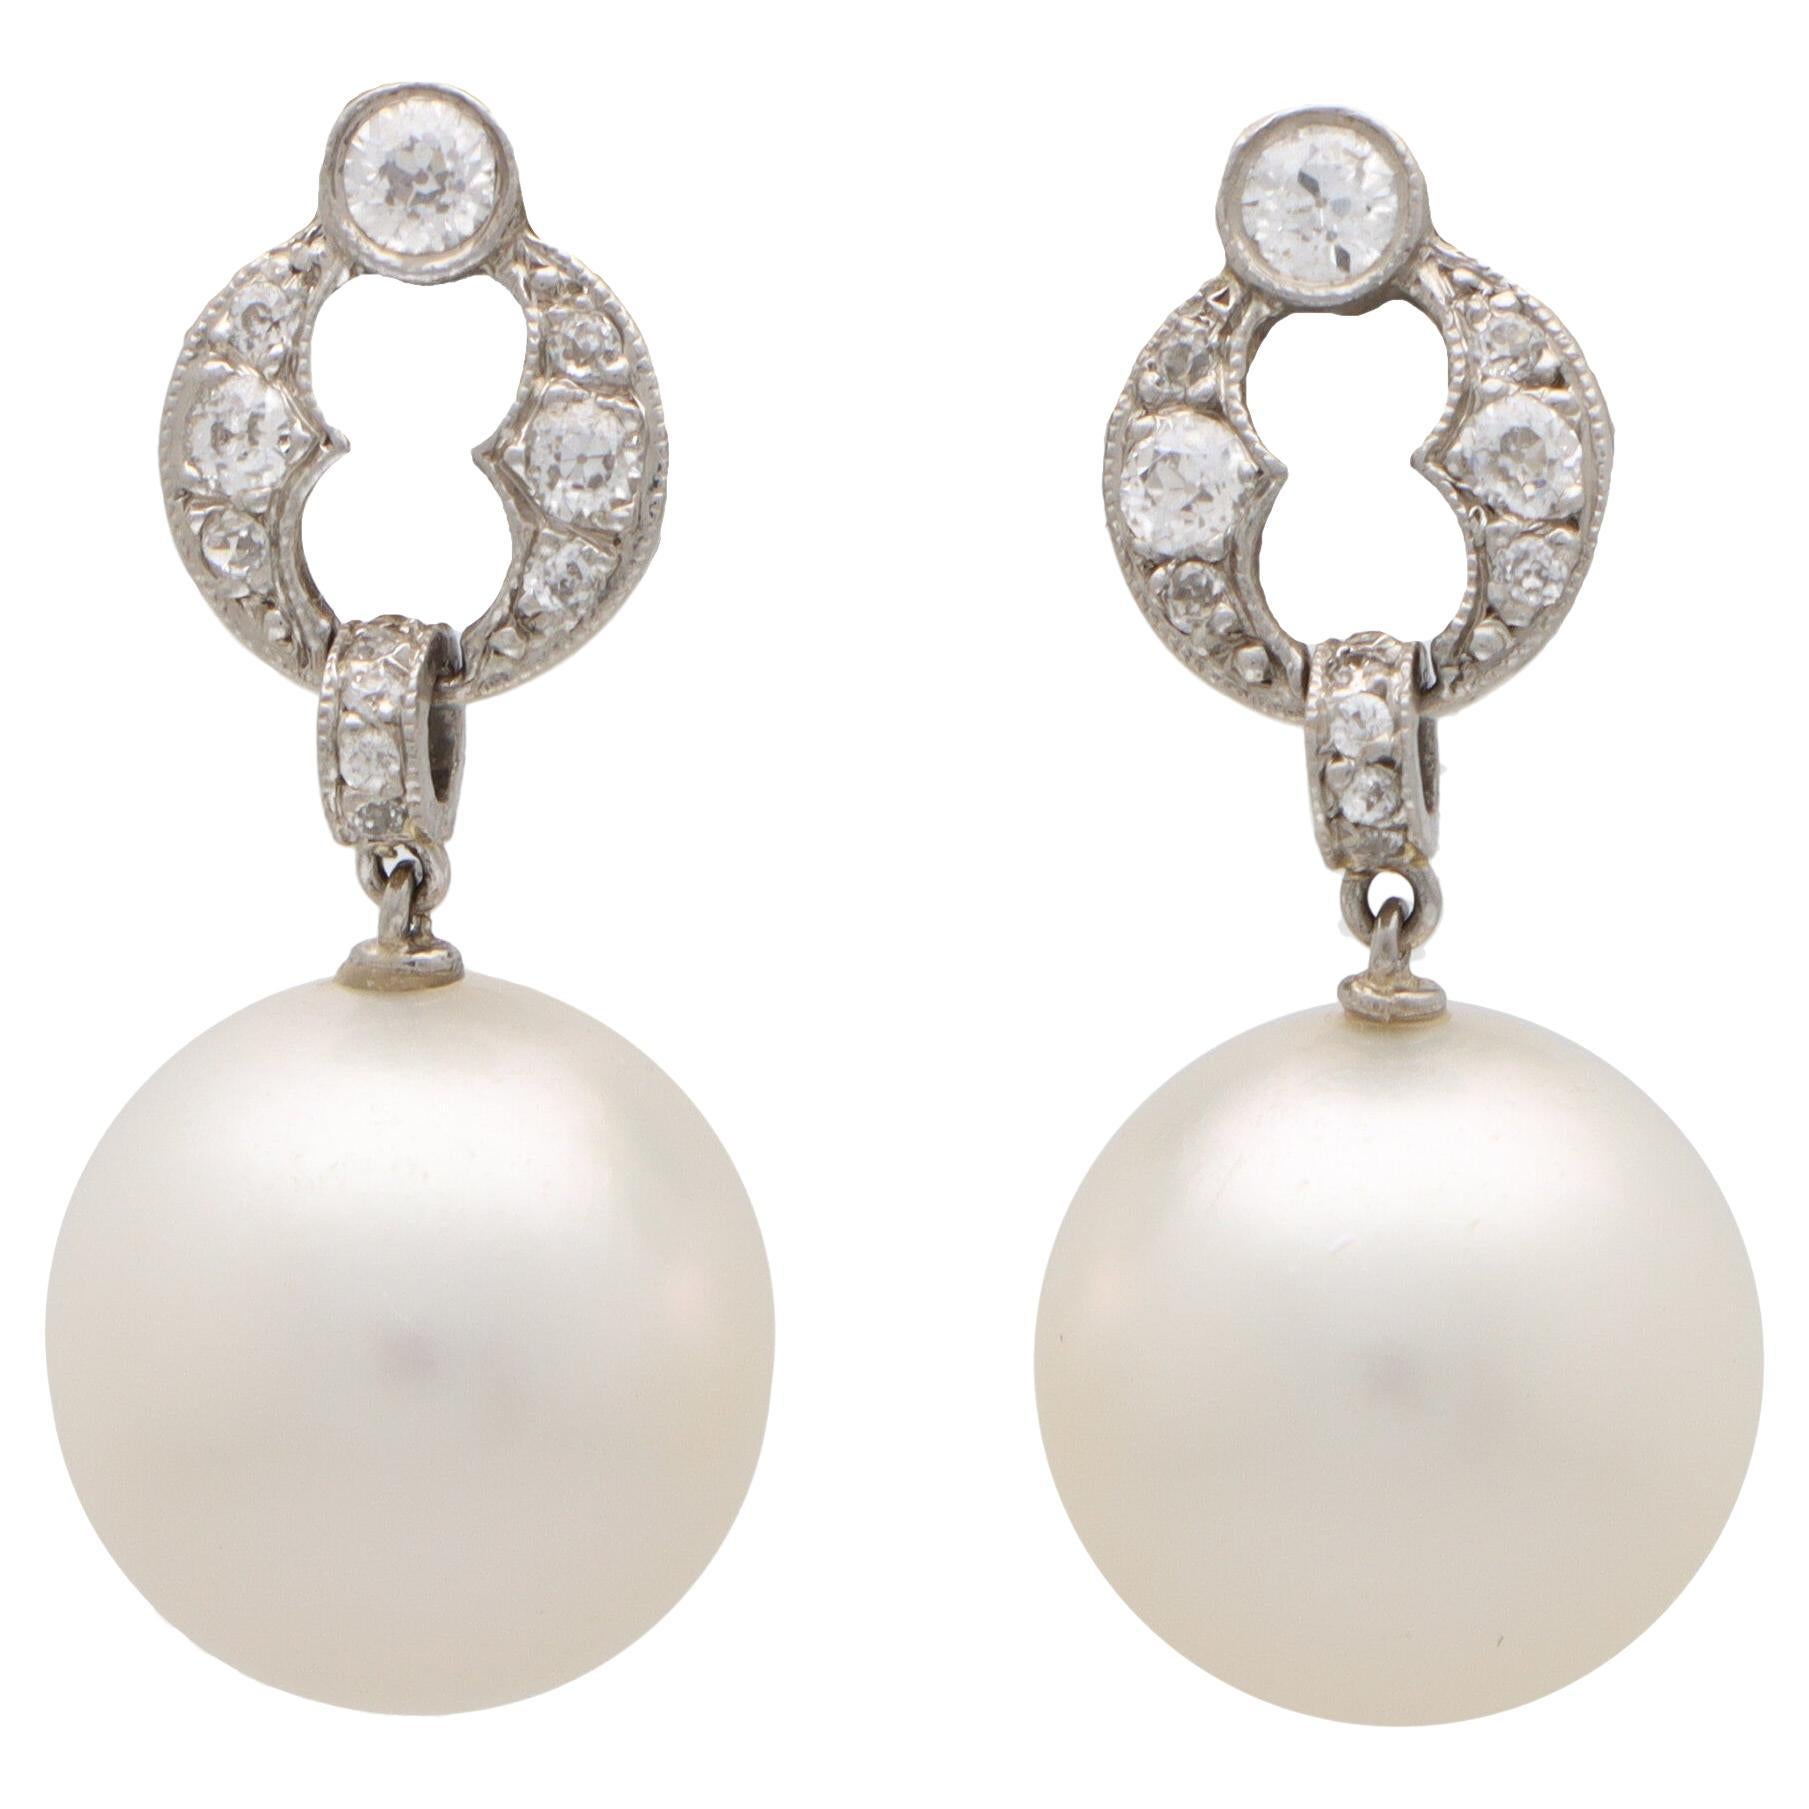 Art Deco Style Diamond and Pearl Drop Earrings Set in Platinum